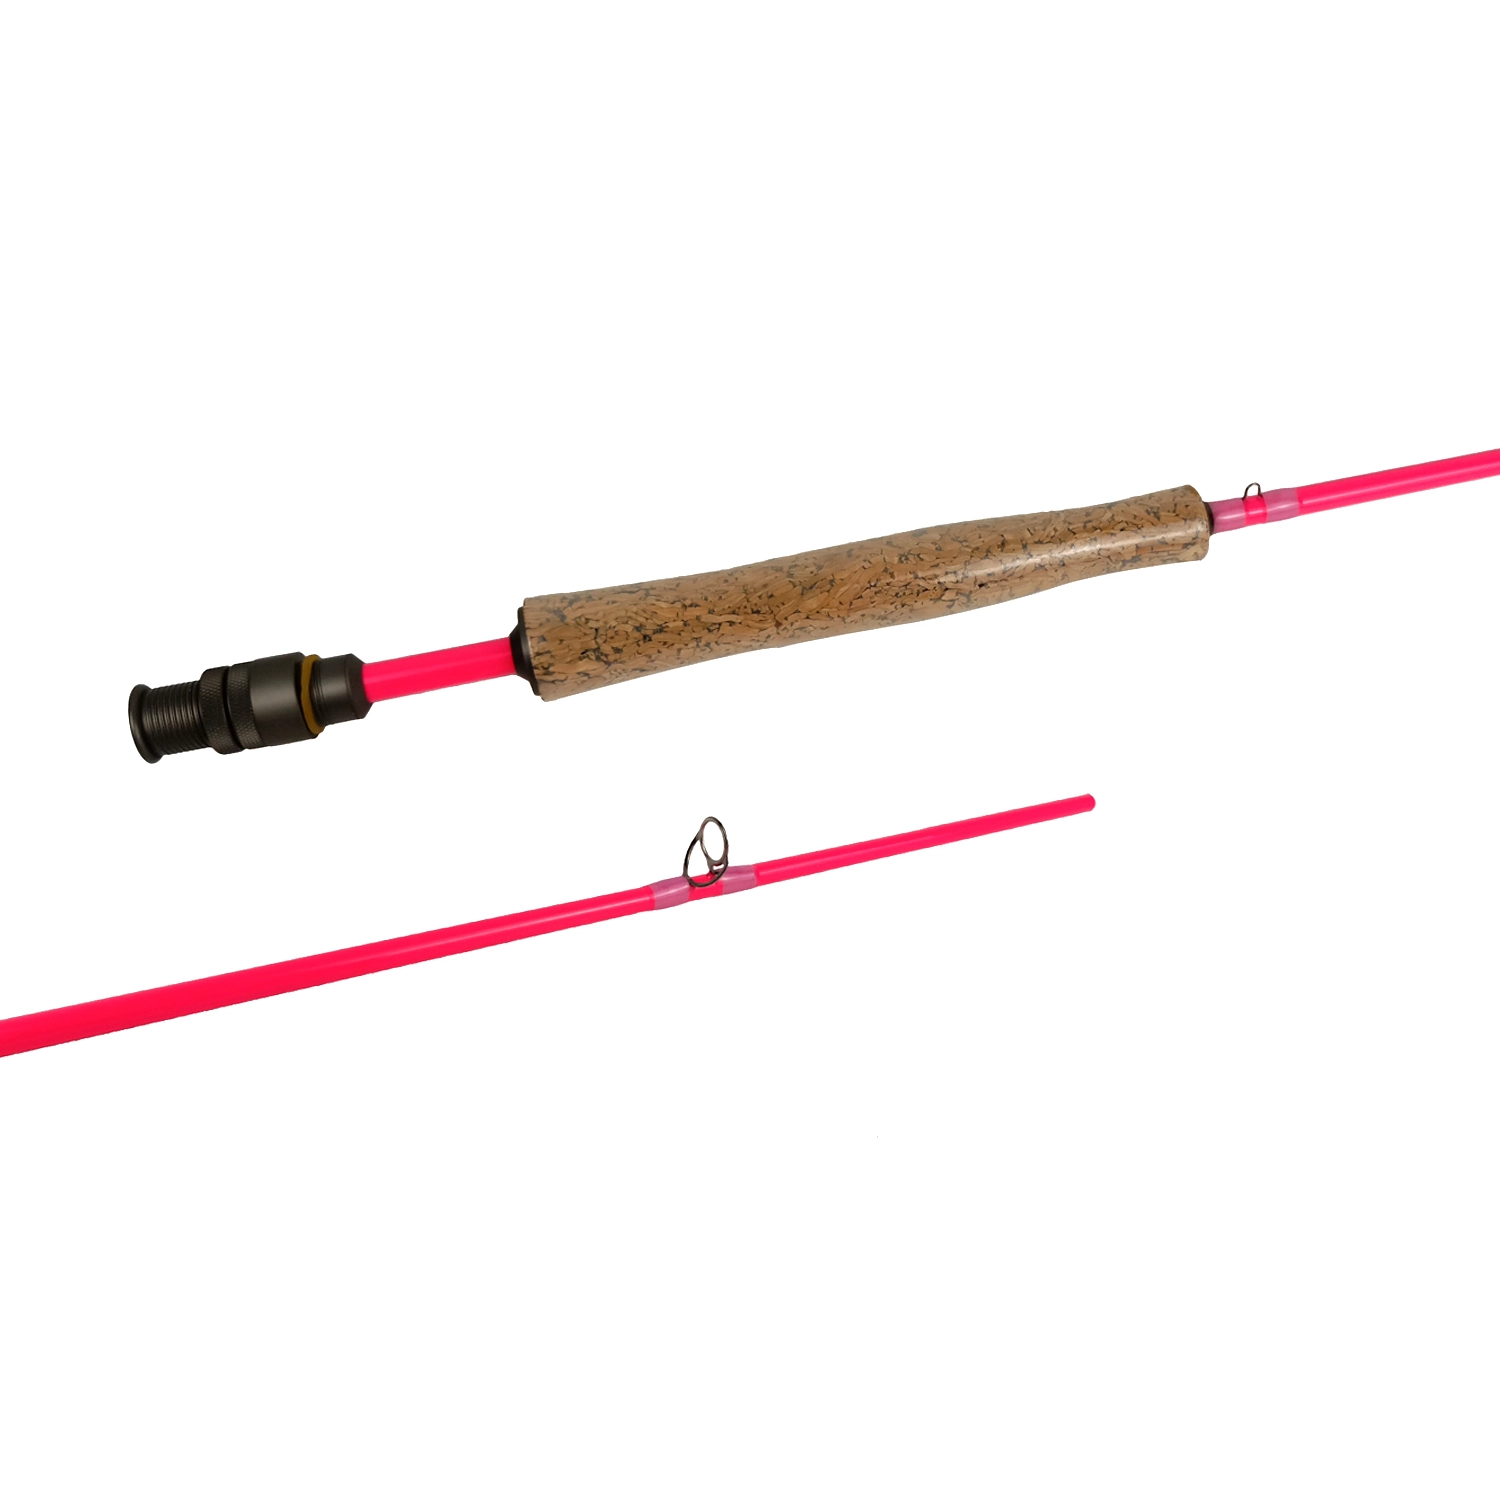 Buy NGT Fly Spin Convertible Travel Fishing Rod Online at